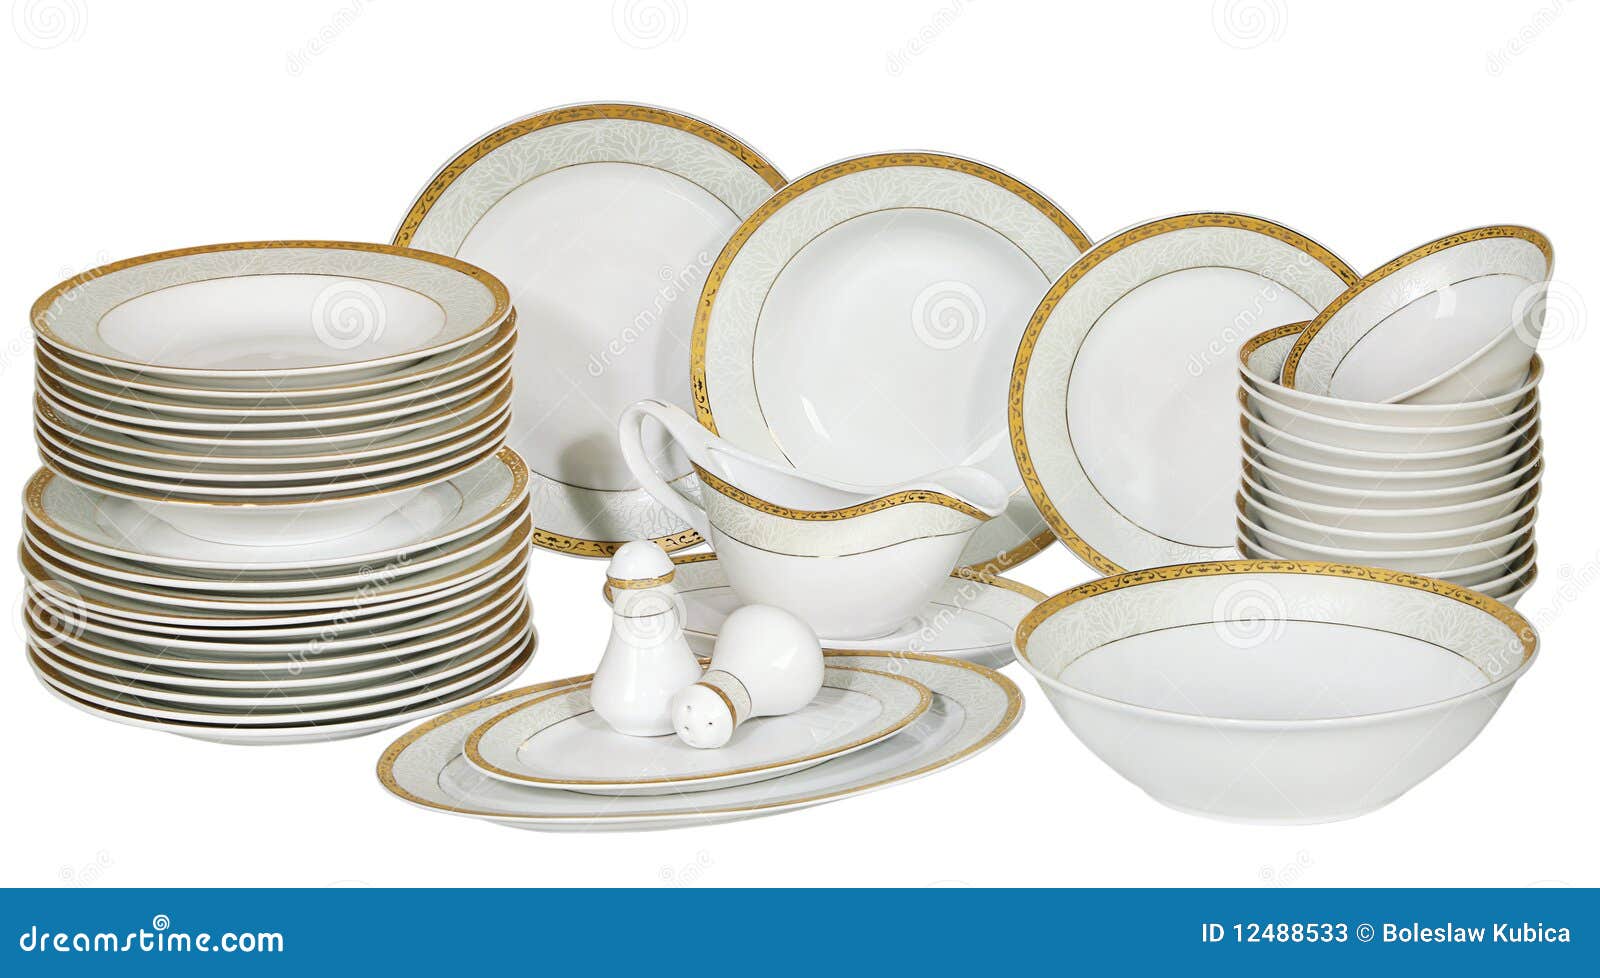 Set of fresh washed plates and dishes isolated on white.